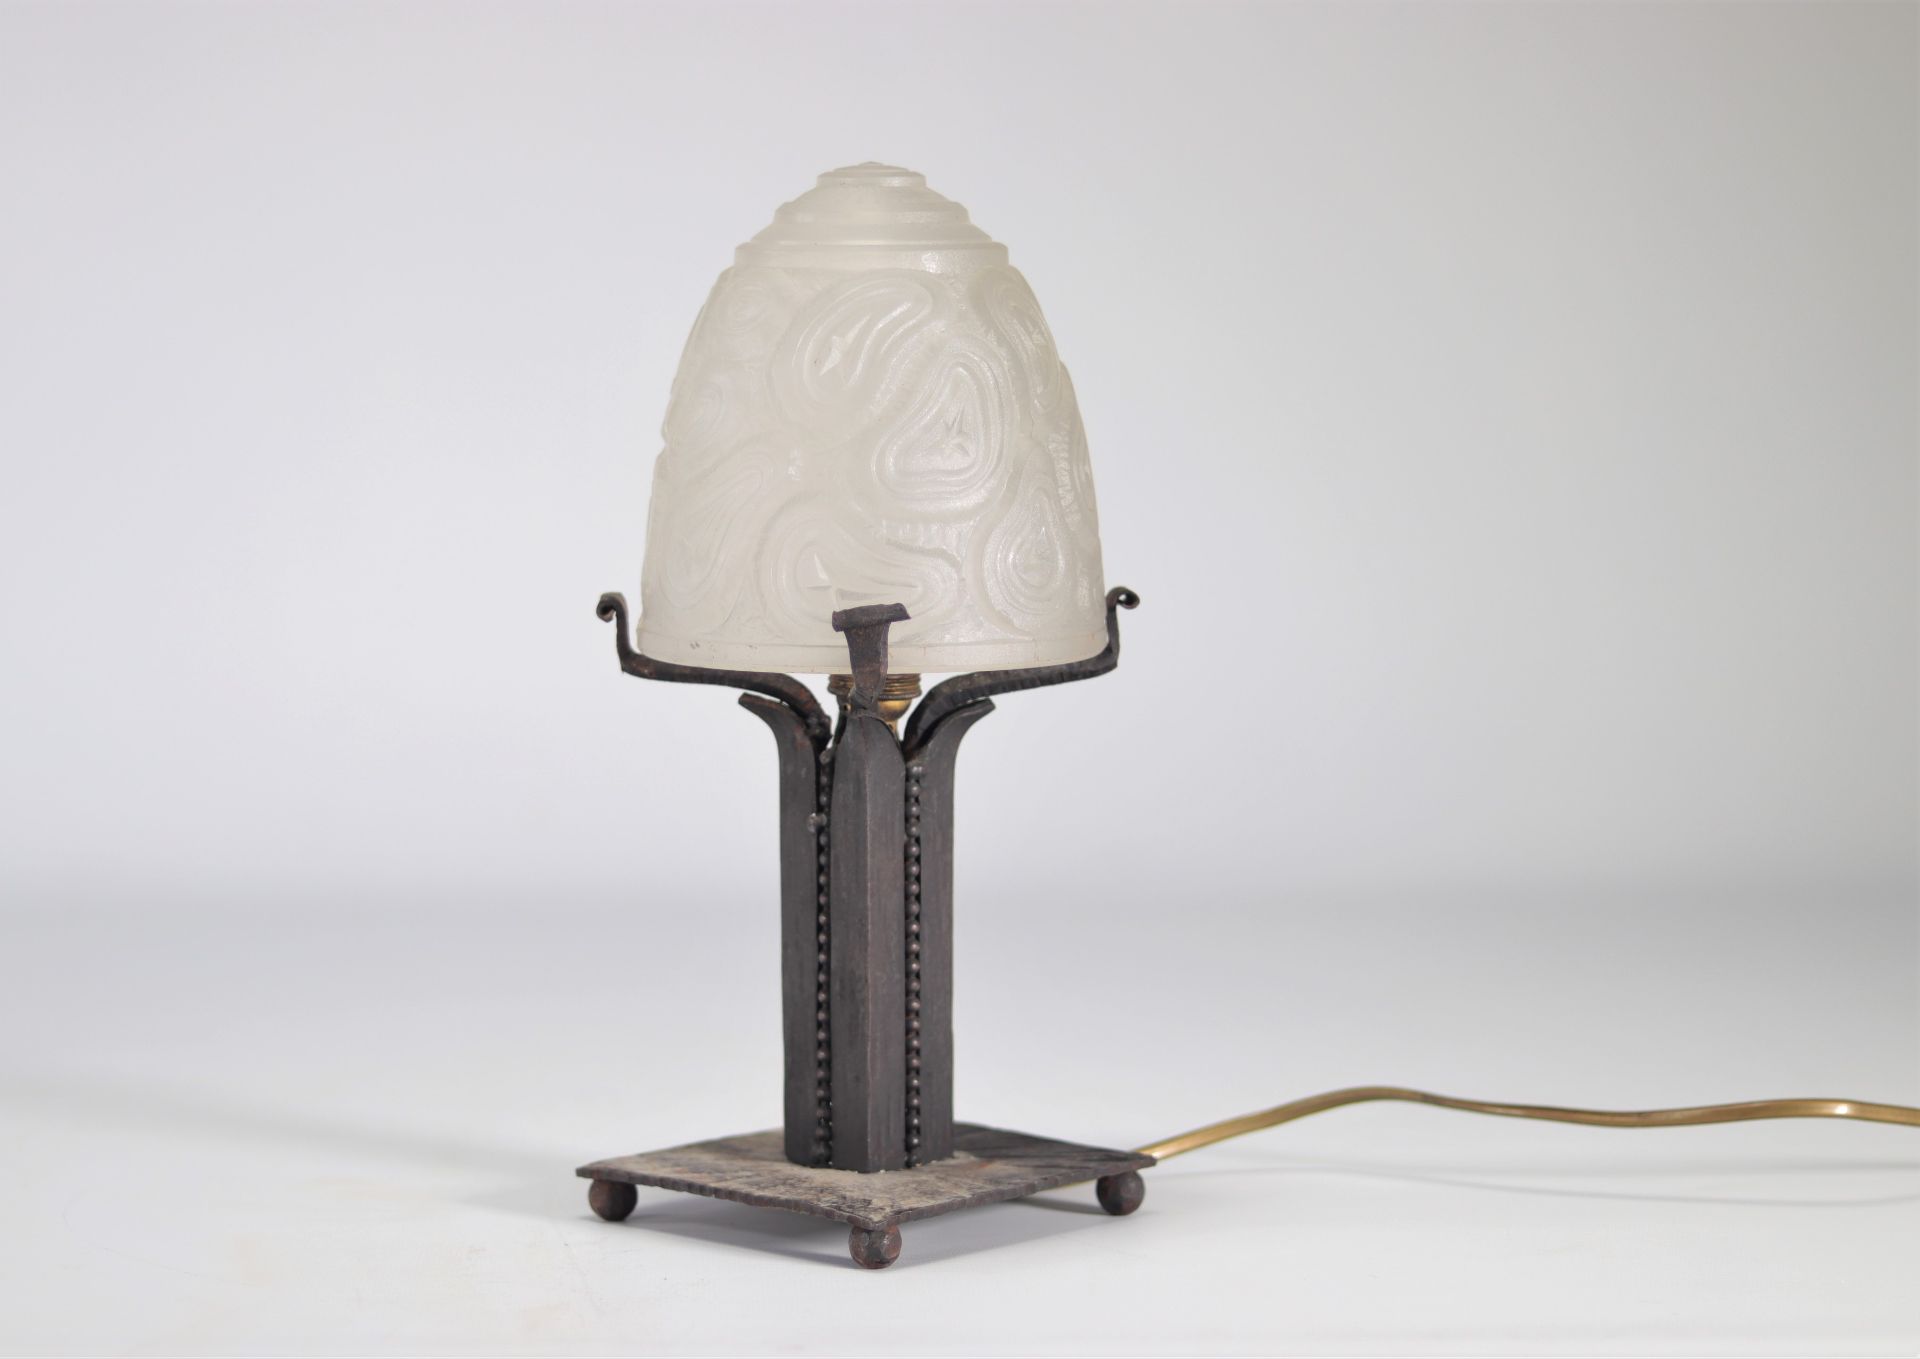 Art Deco desk lamp with hammered wrought iron base with geometric pattern - Image 3 of 3